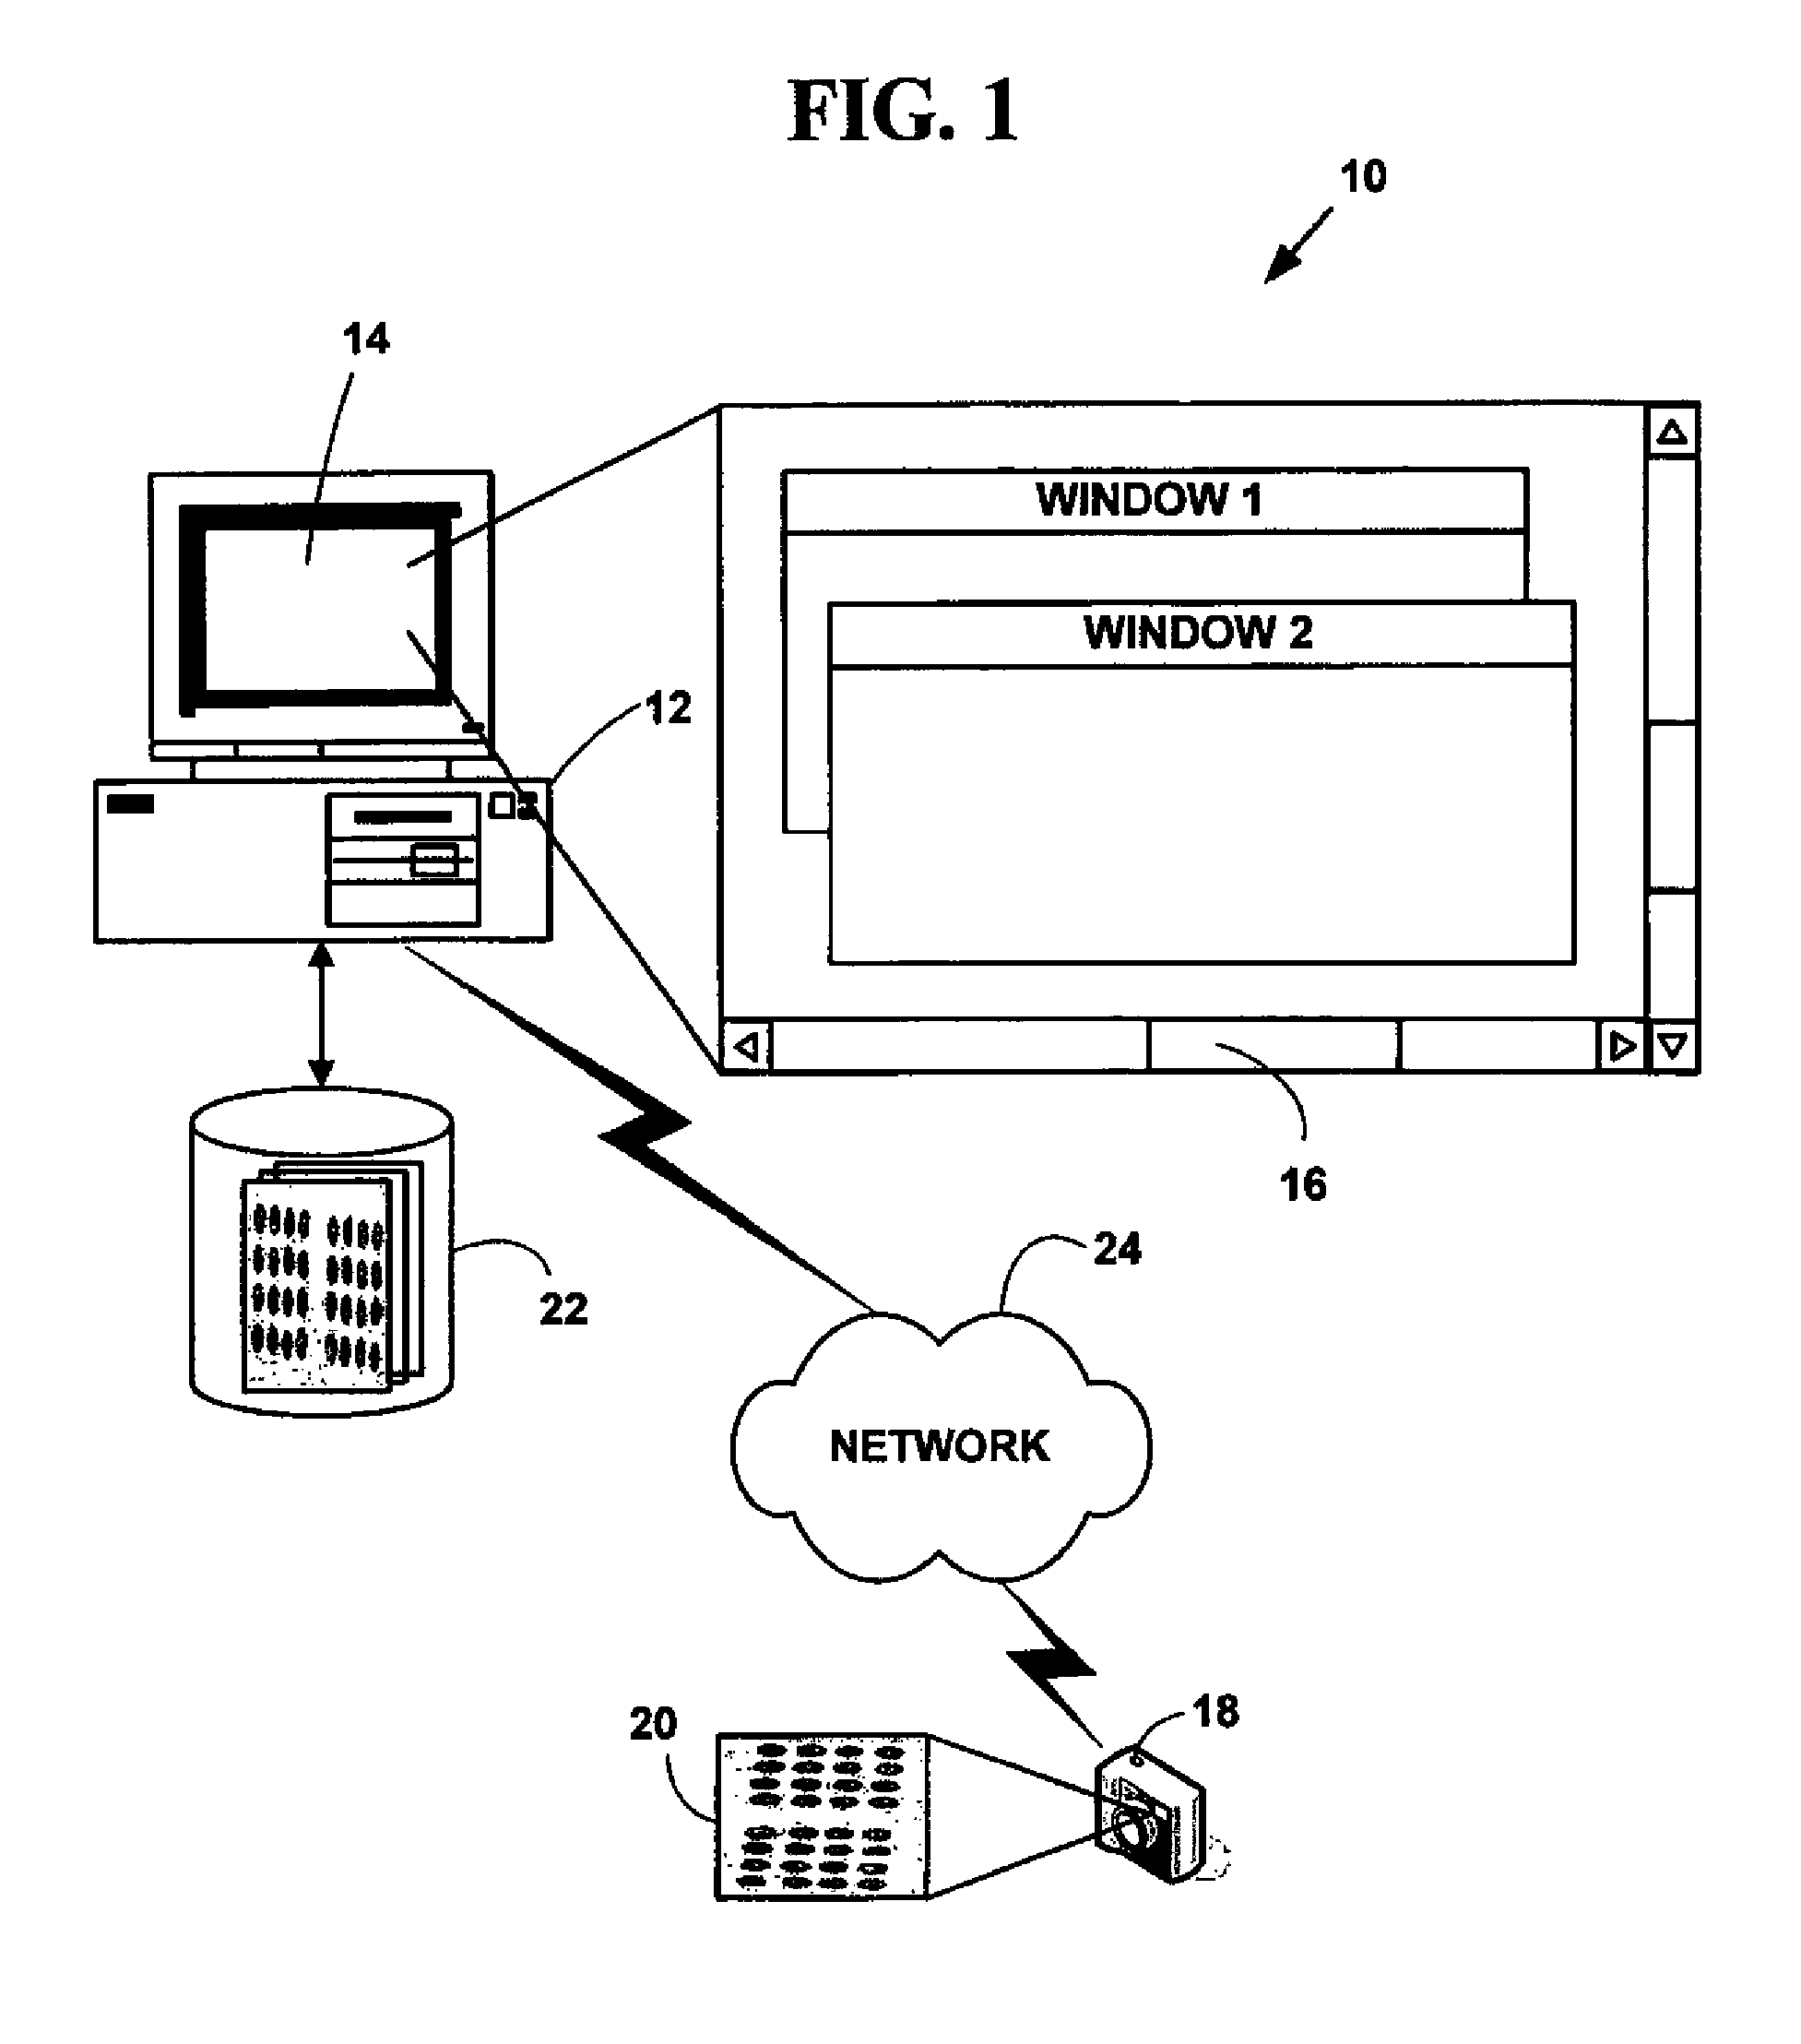 Method for automated processing of digital images of tissue micro-arrays (TMA)